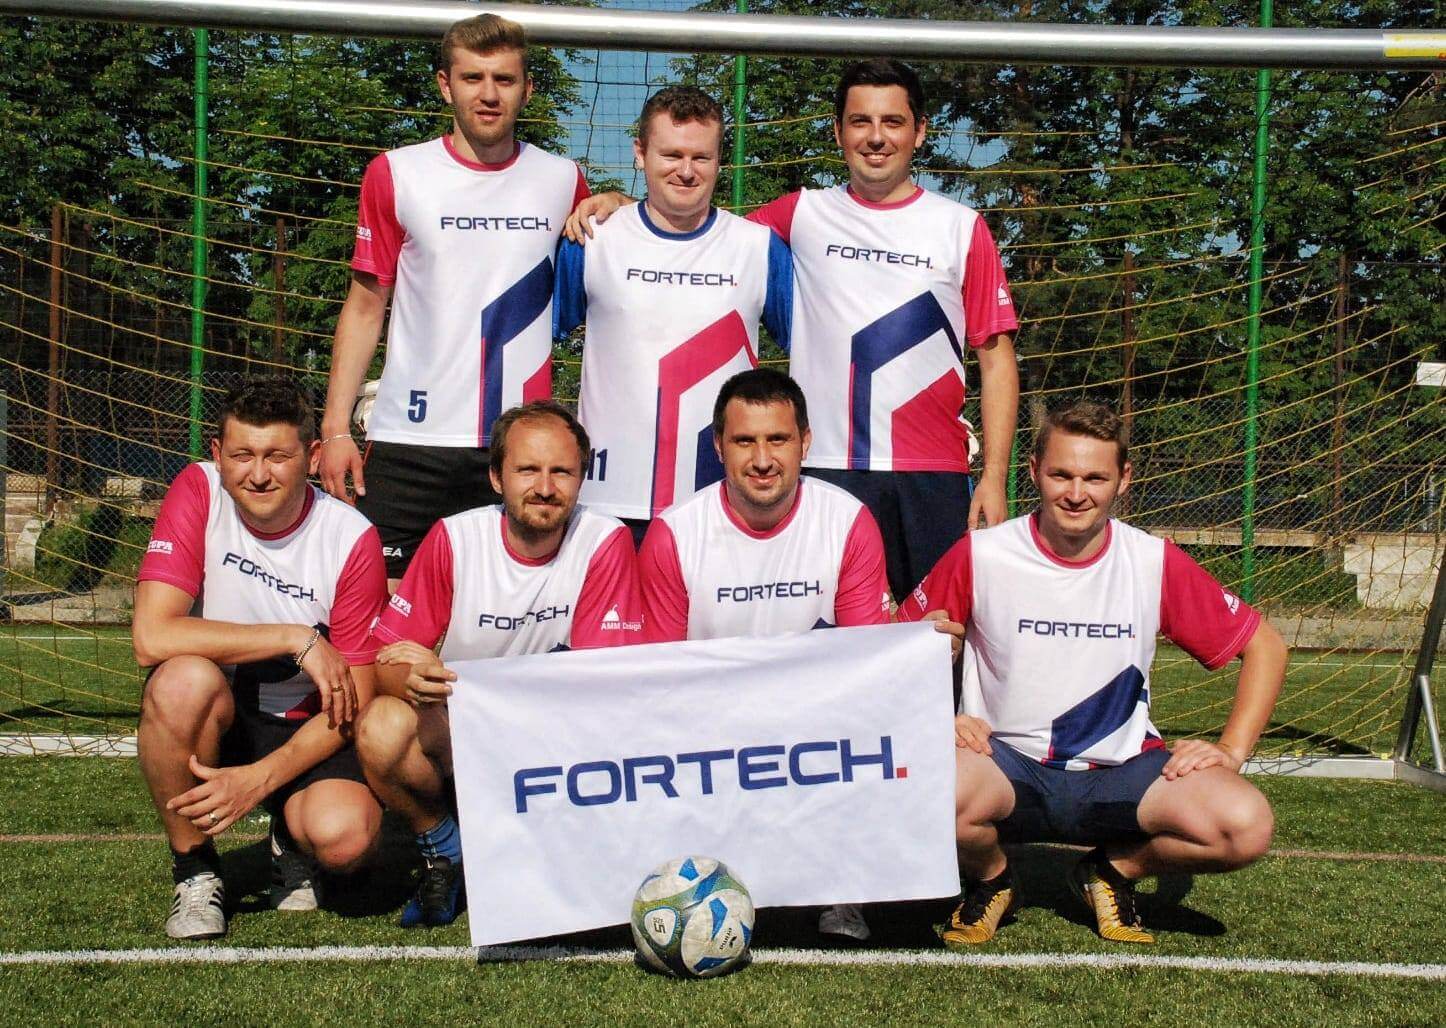 Emil and the Fortech Football Team